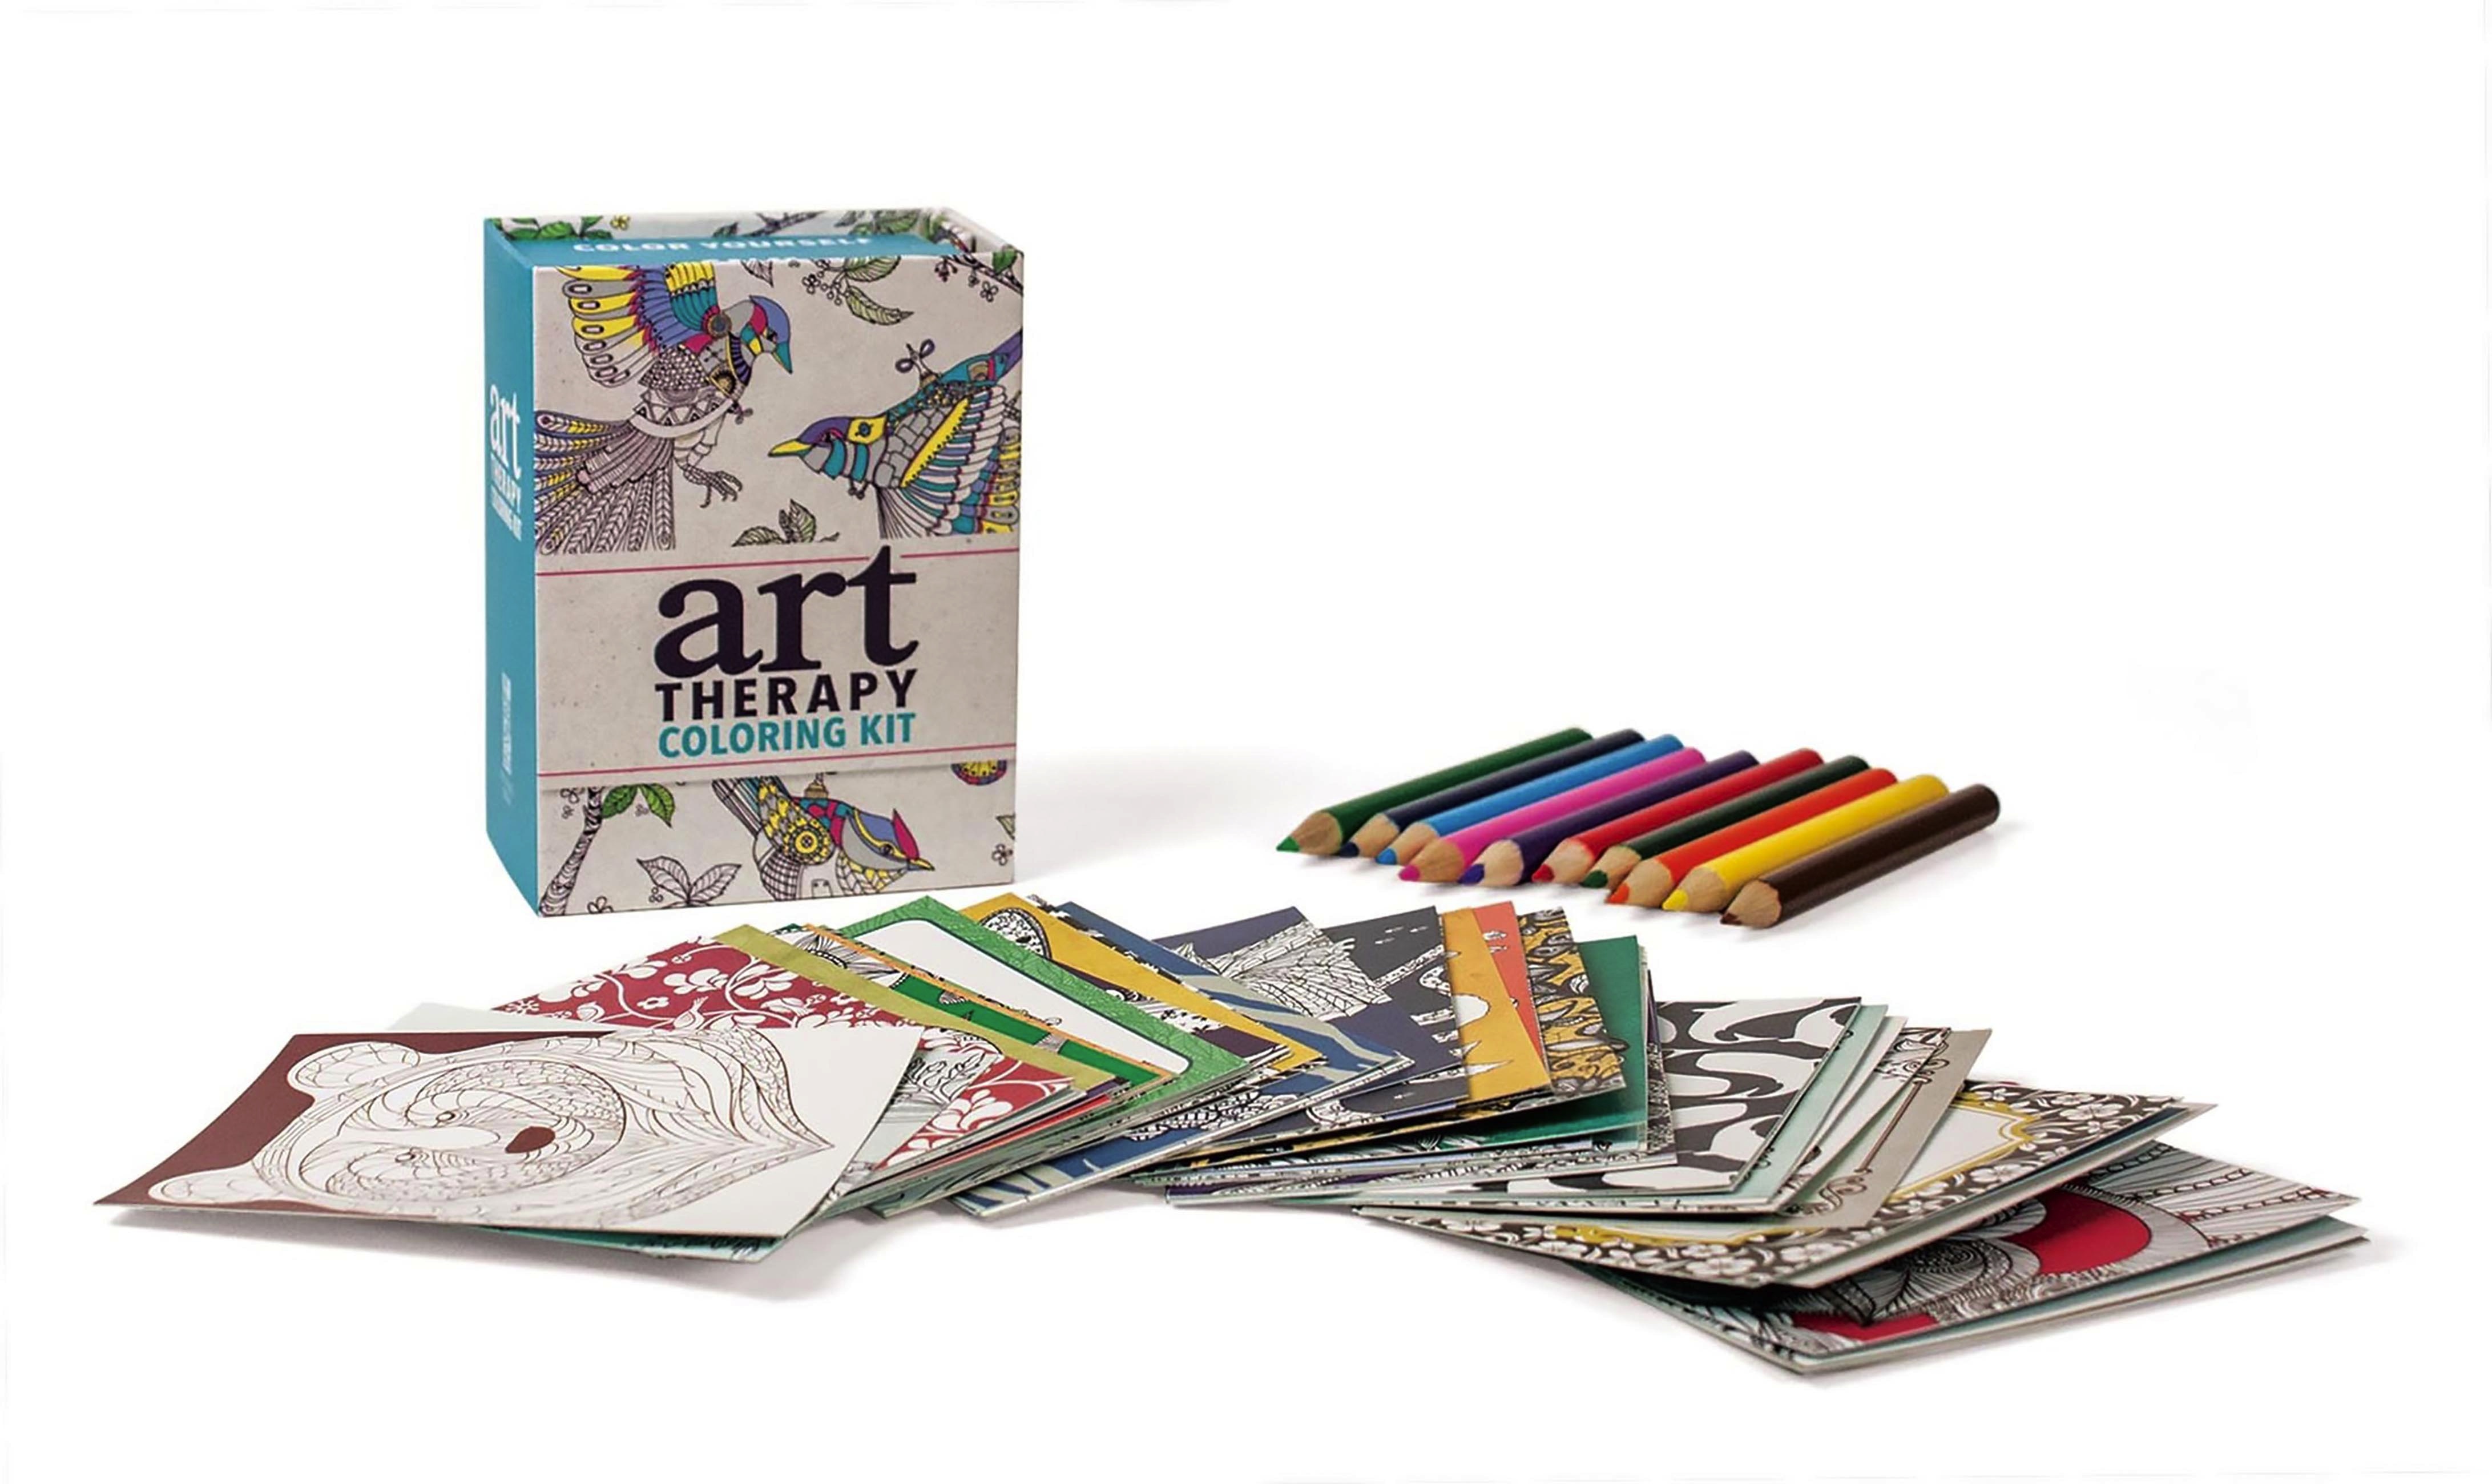 Download Art Therapy Coloring Kit By Sam Loman Hachette Book Group